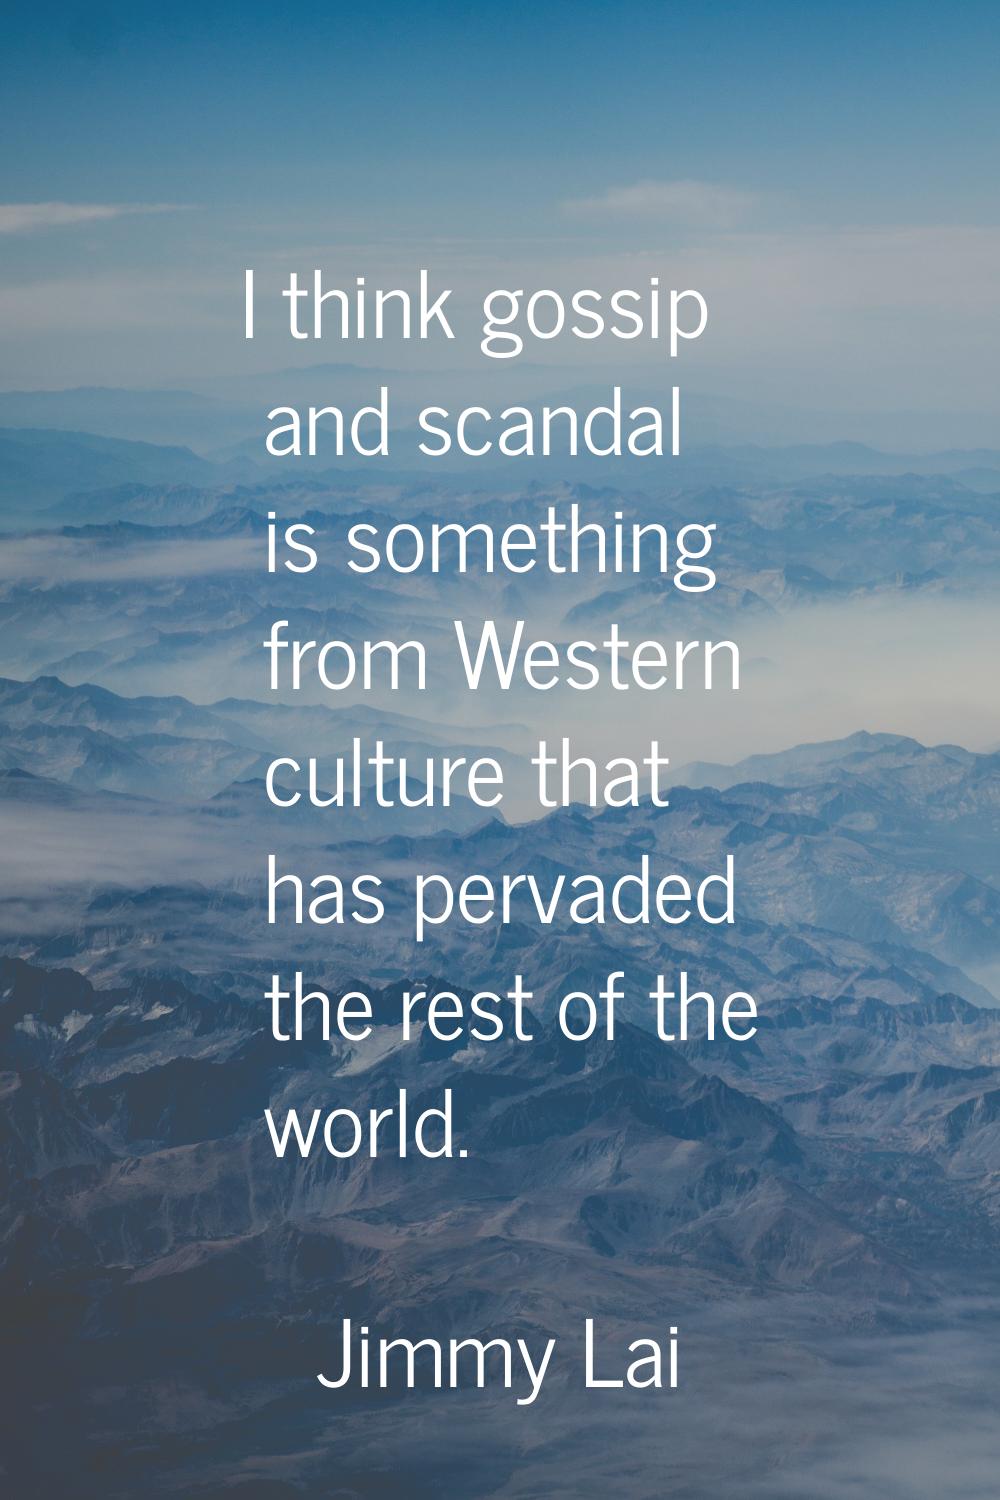 I think gossip and scandal is something from Western culture that has pervaded the rest of the worl